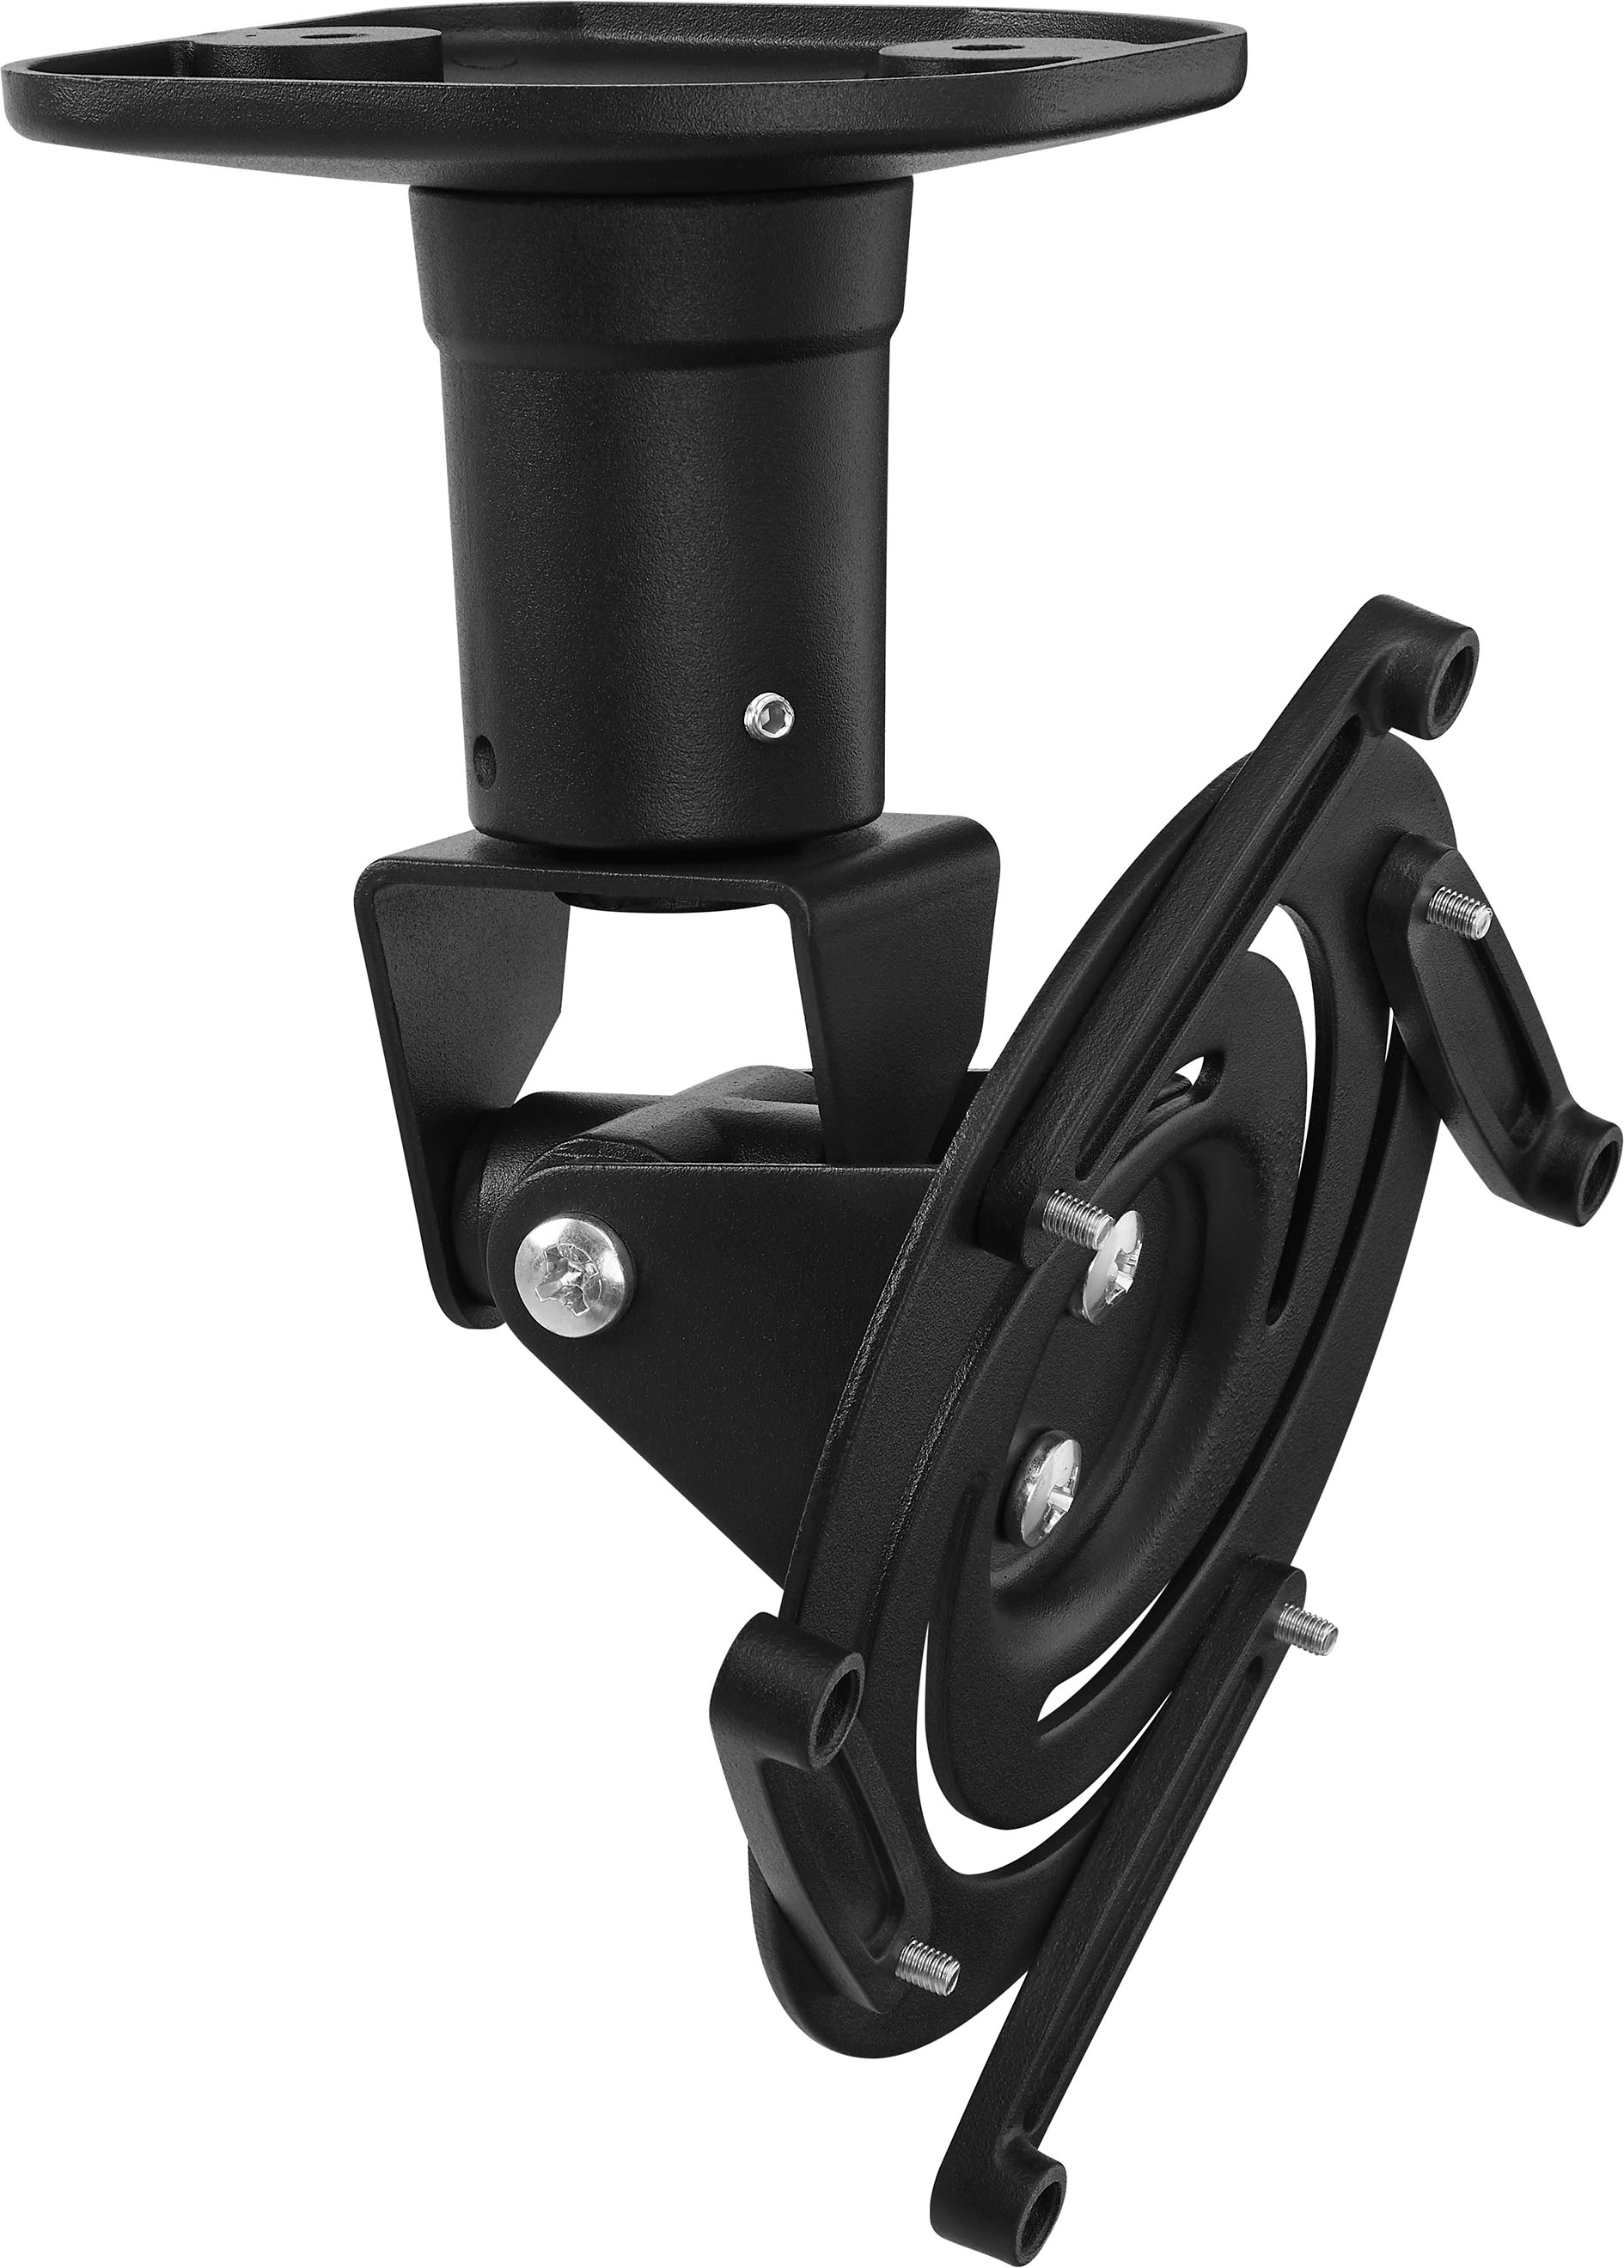 Angle View: Kanto - Universal Projector Ceiling Mount - Black